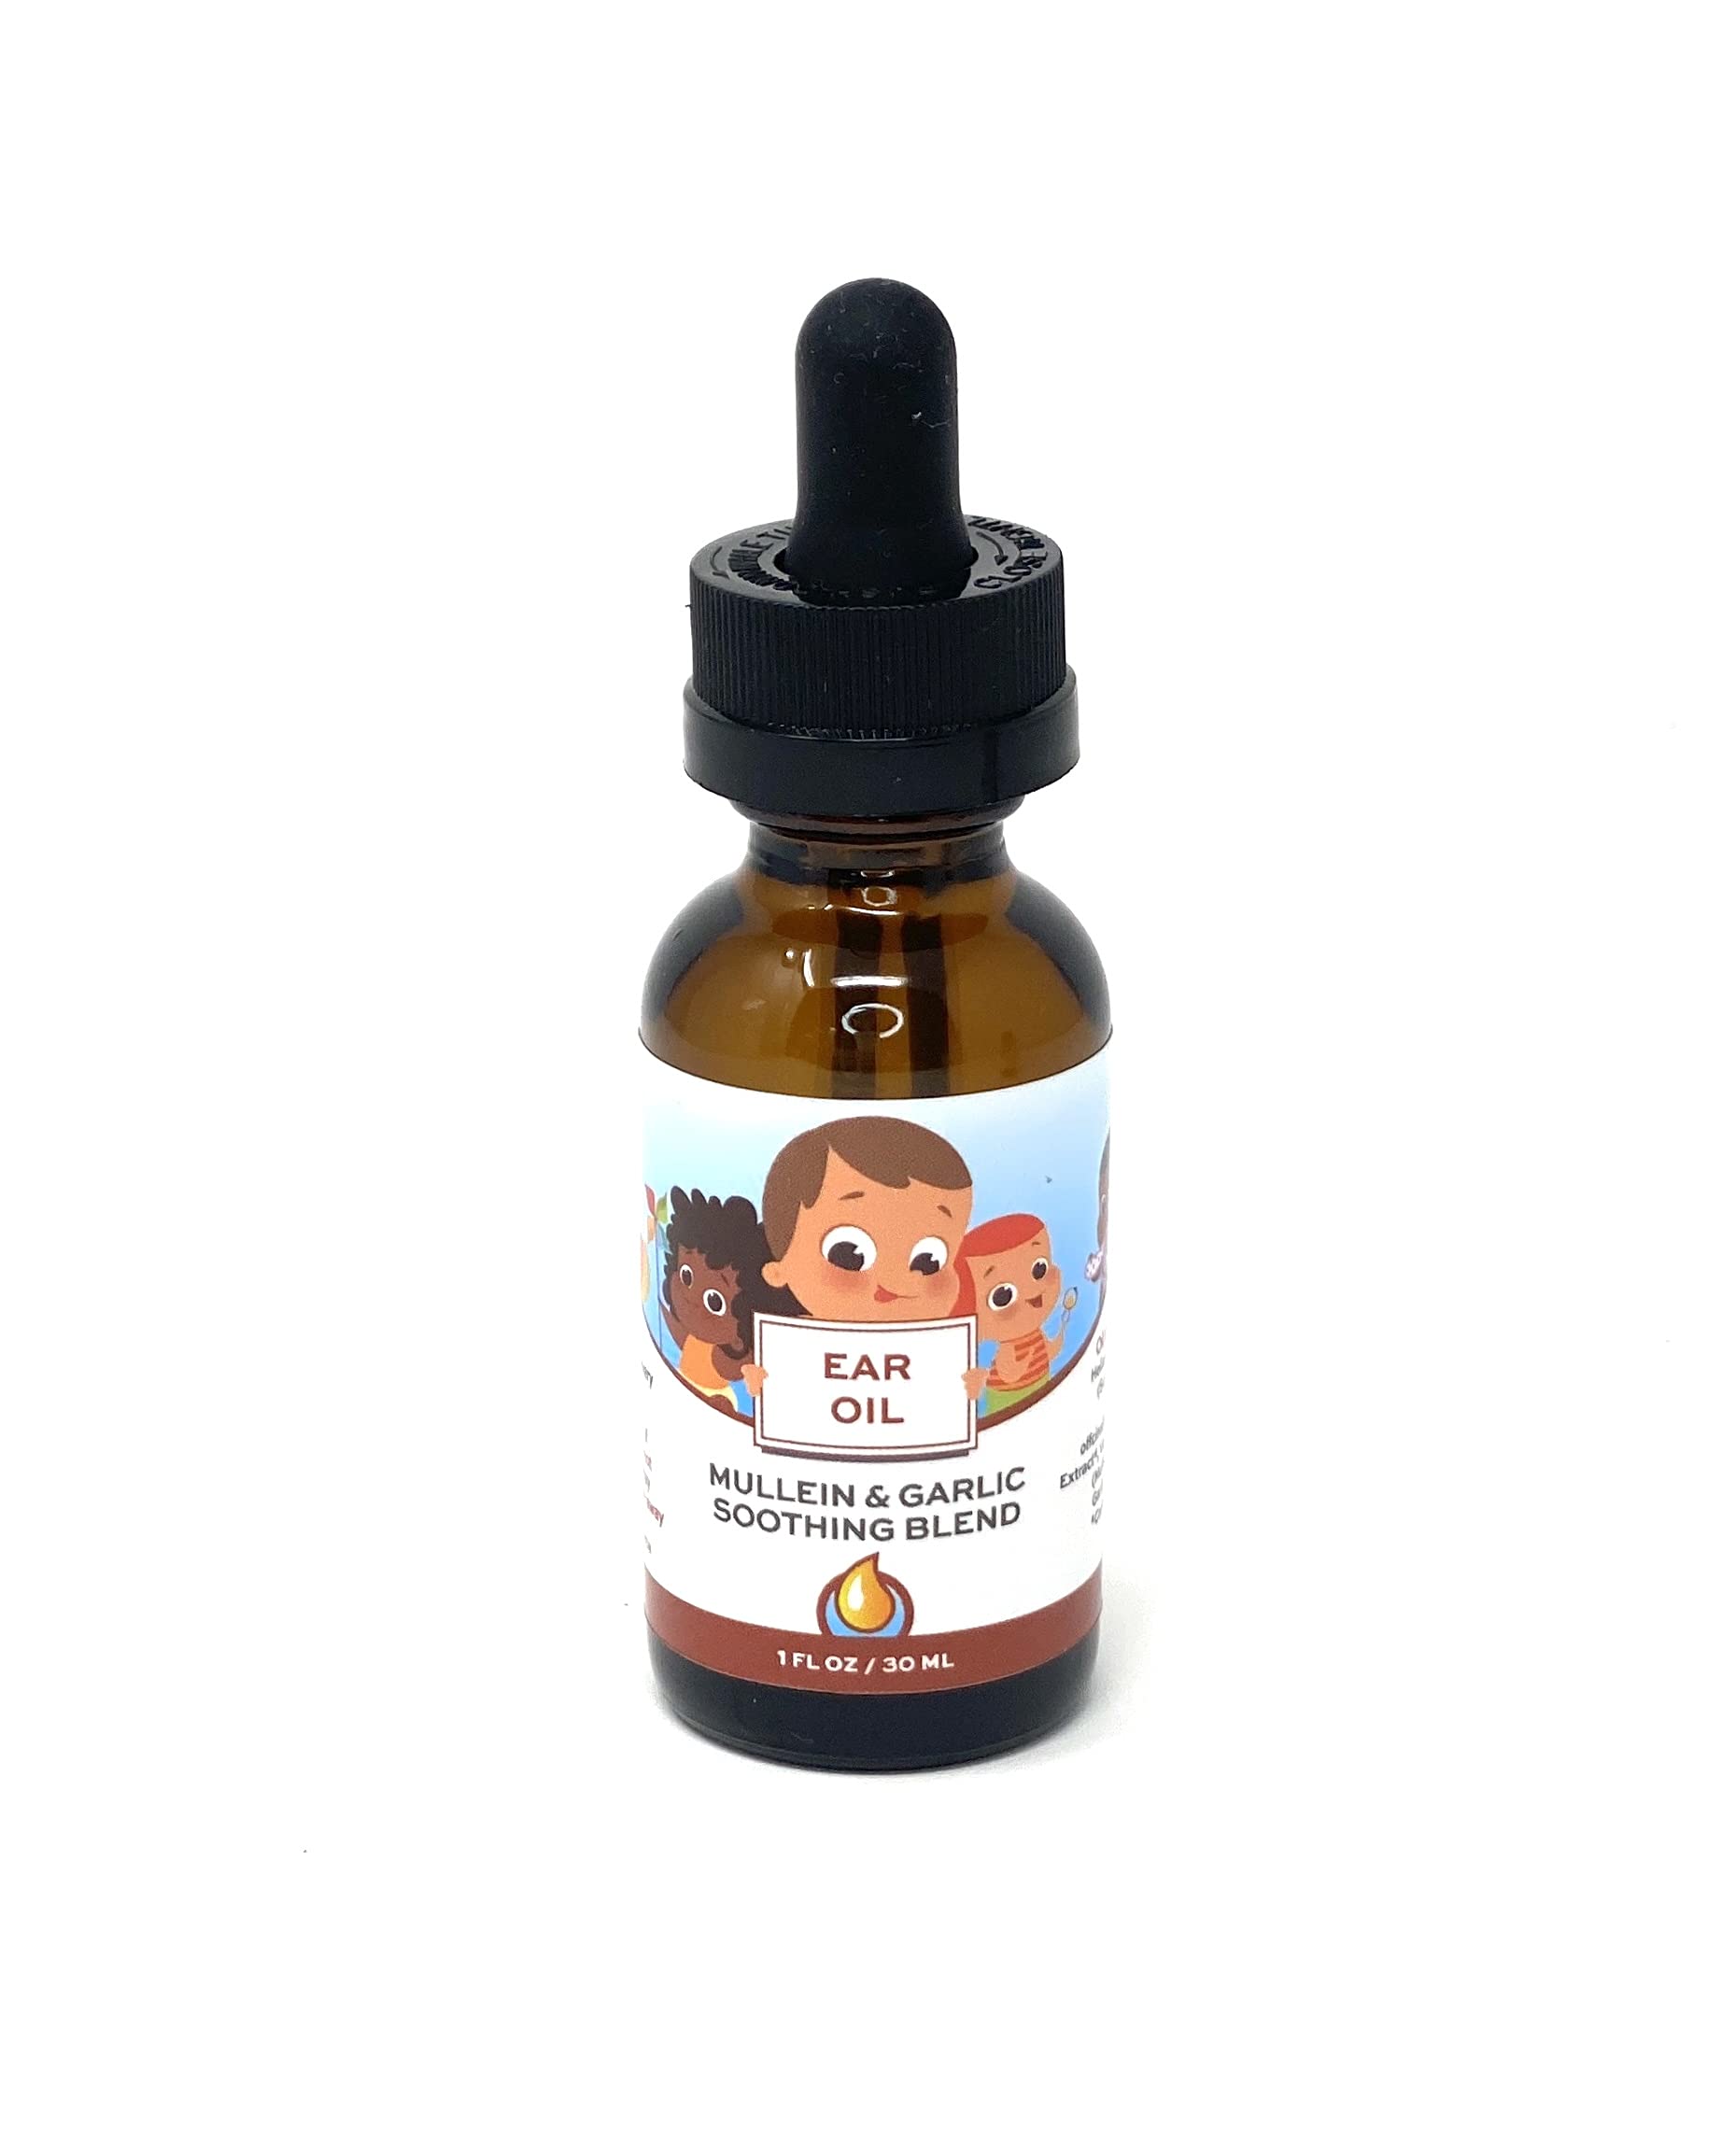 Punkin Butt Teething Oil and Ear Oil for Sore Gum and Ear Canal Relief | All Natural, Organic, Safe for Infants, Chemical-Free